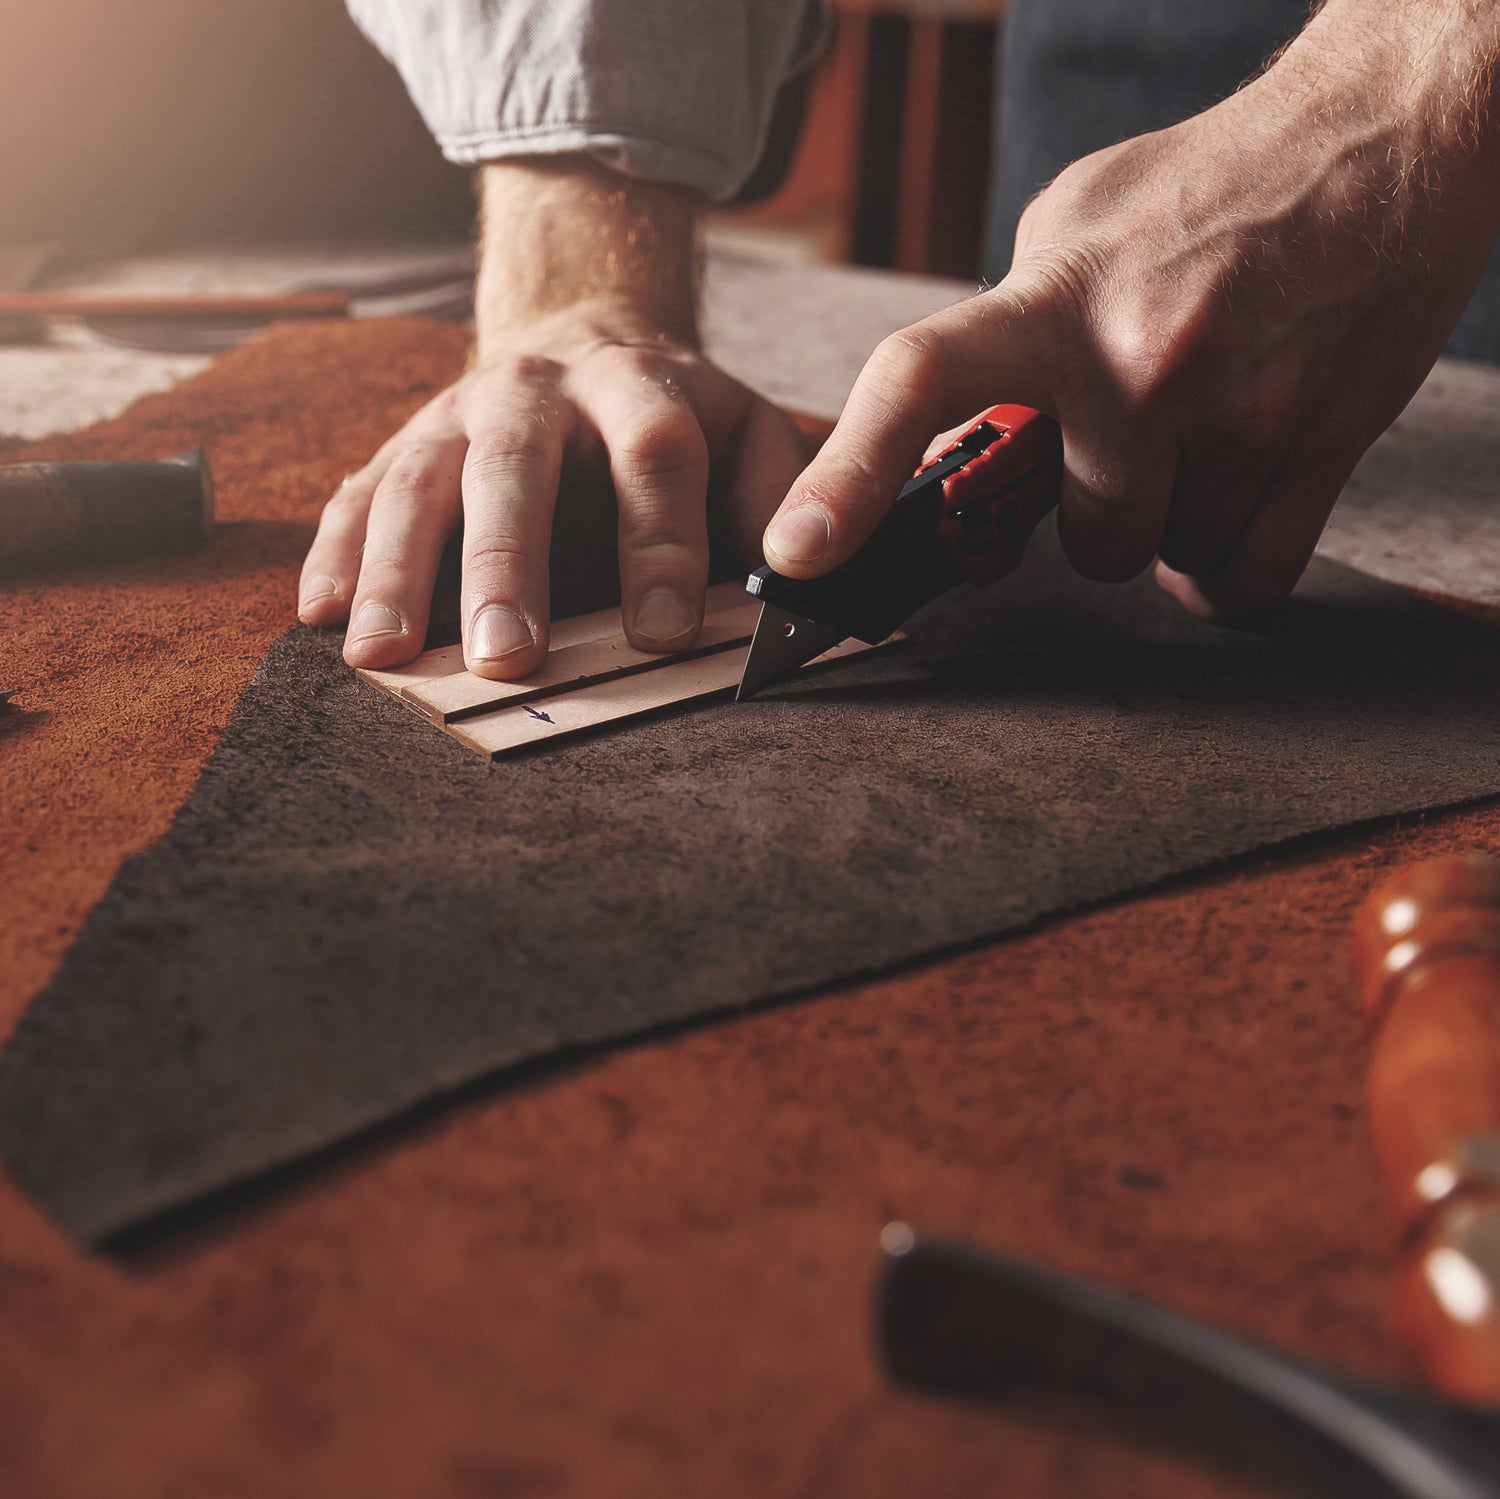 A leatherworker cuts suede, one of the inspirations for our Mahogany Suede scented wax melt bar